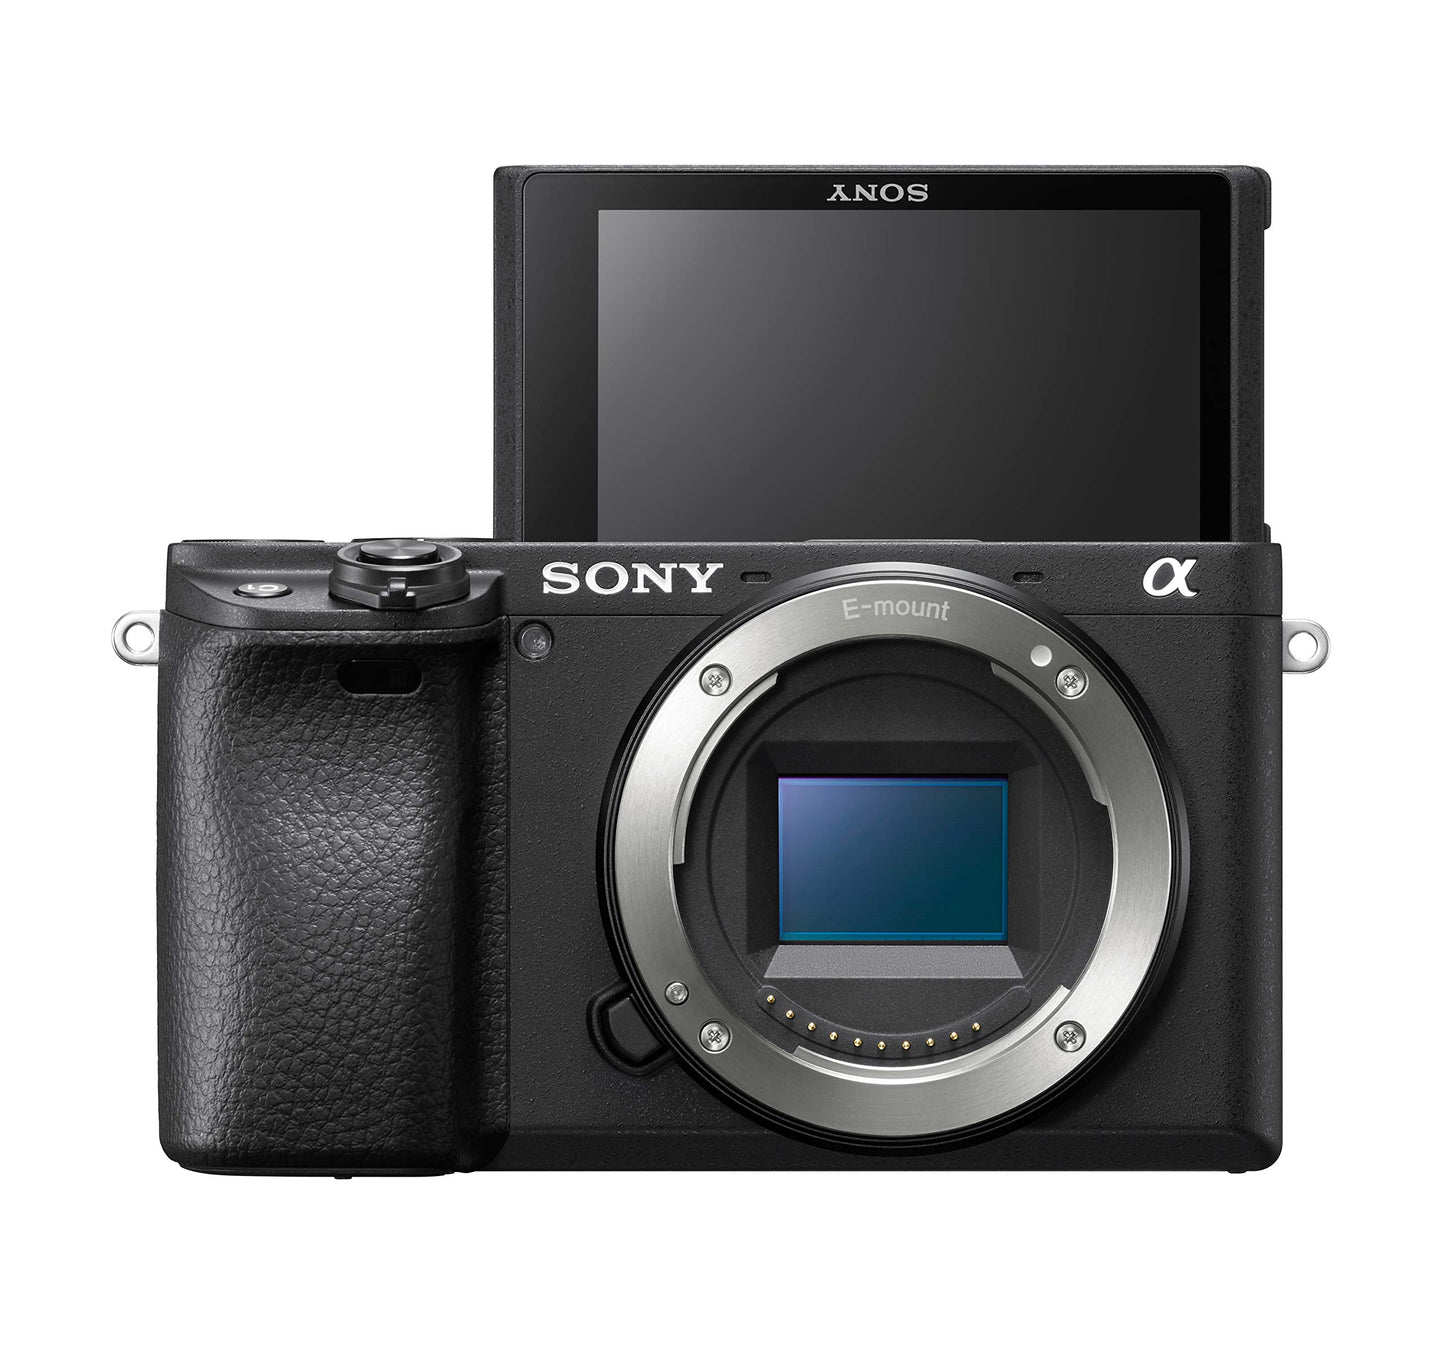 Sony Alpha A6400 Mirrorless Camera With 16-50 Lens Kit, Compact Aps-C Interchangeable Lens Digital Camera With Real-Time Eye Auto Focus, 4K Video & Flip Up Touchscreen, Ilce-6400Lb